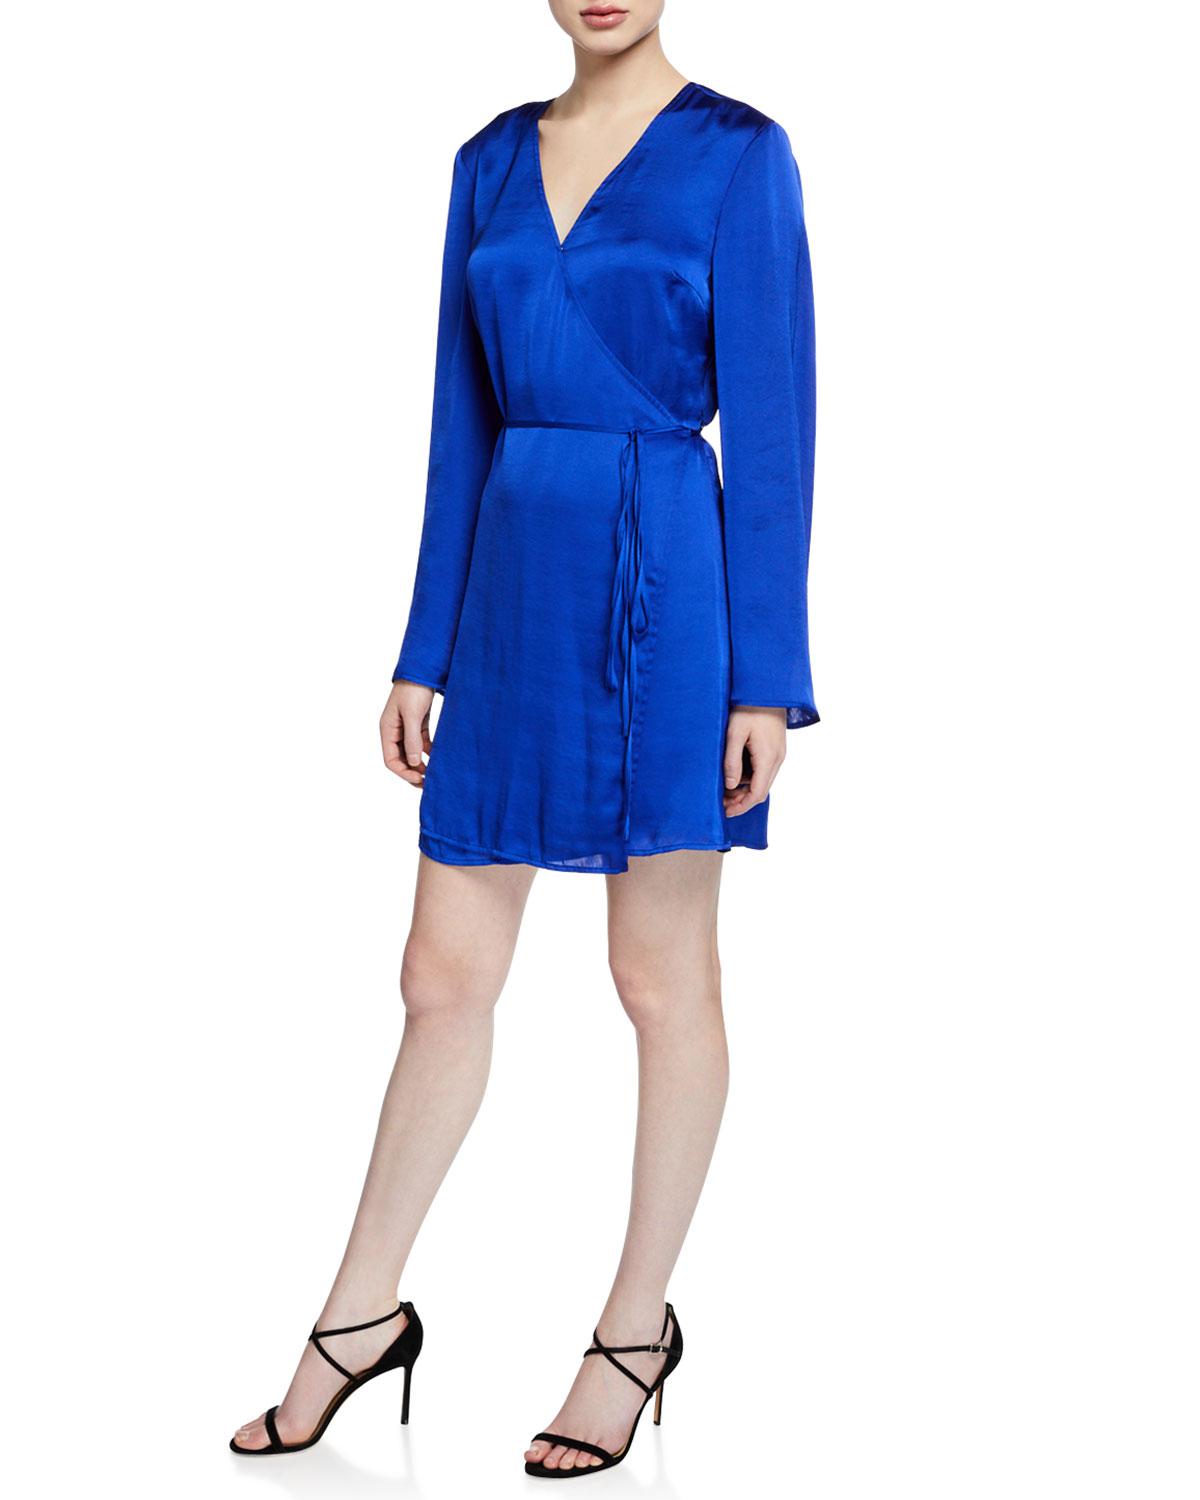 Cupcakes And Cashmere Kaidence Satin Long-sleeve Wrap Dress in Blue - Lyst